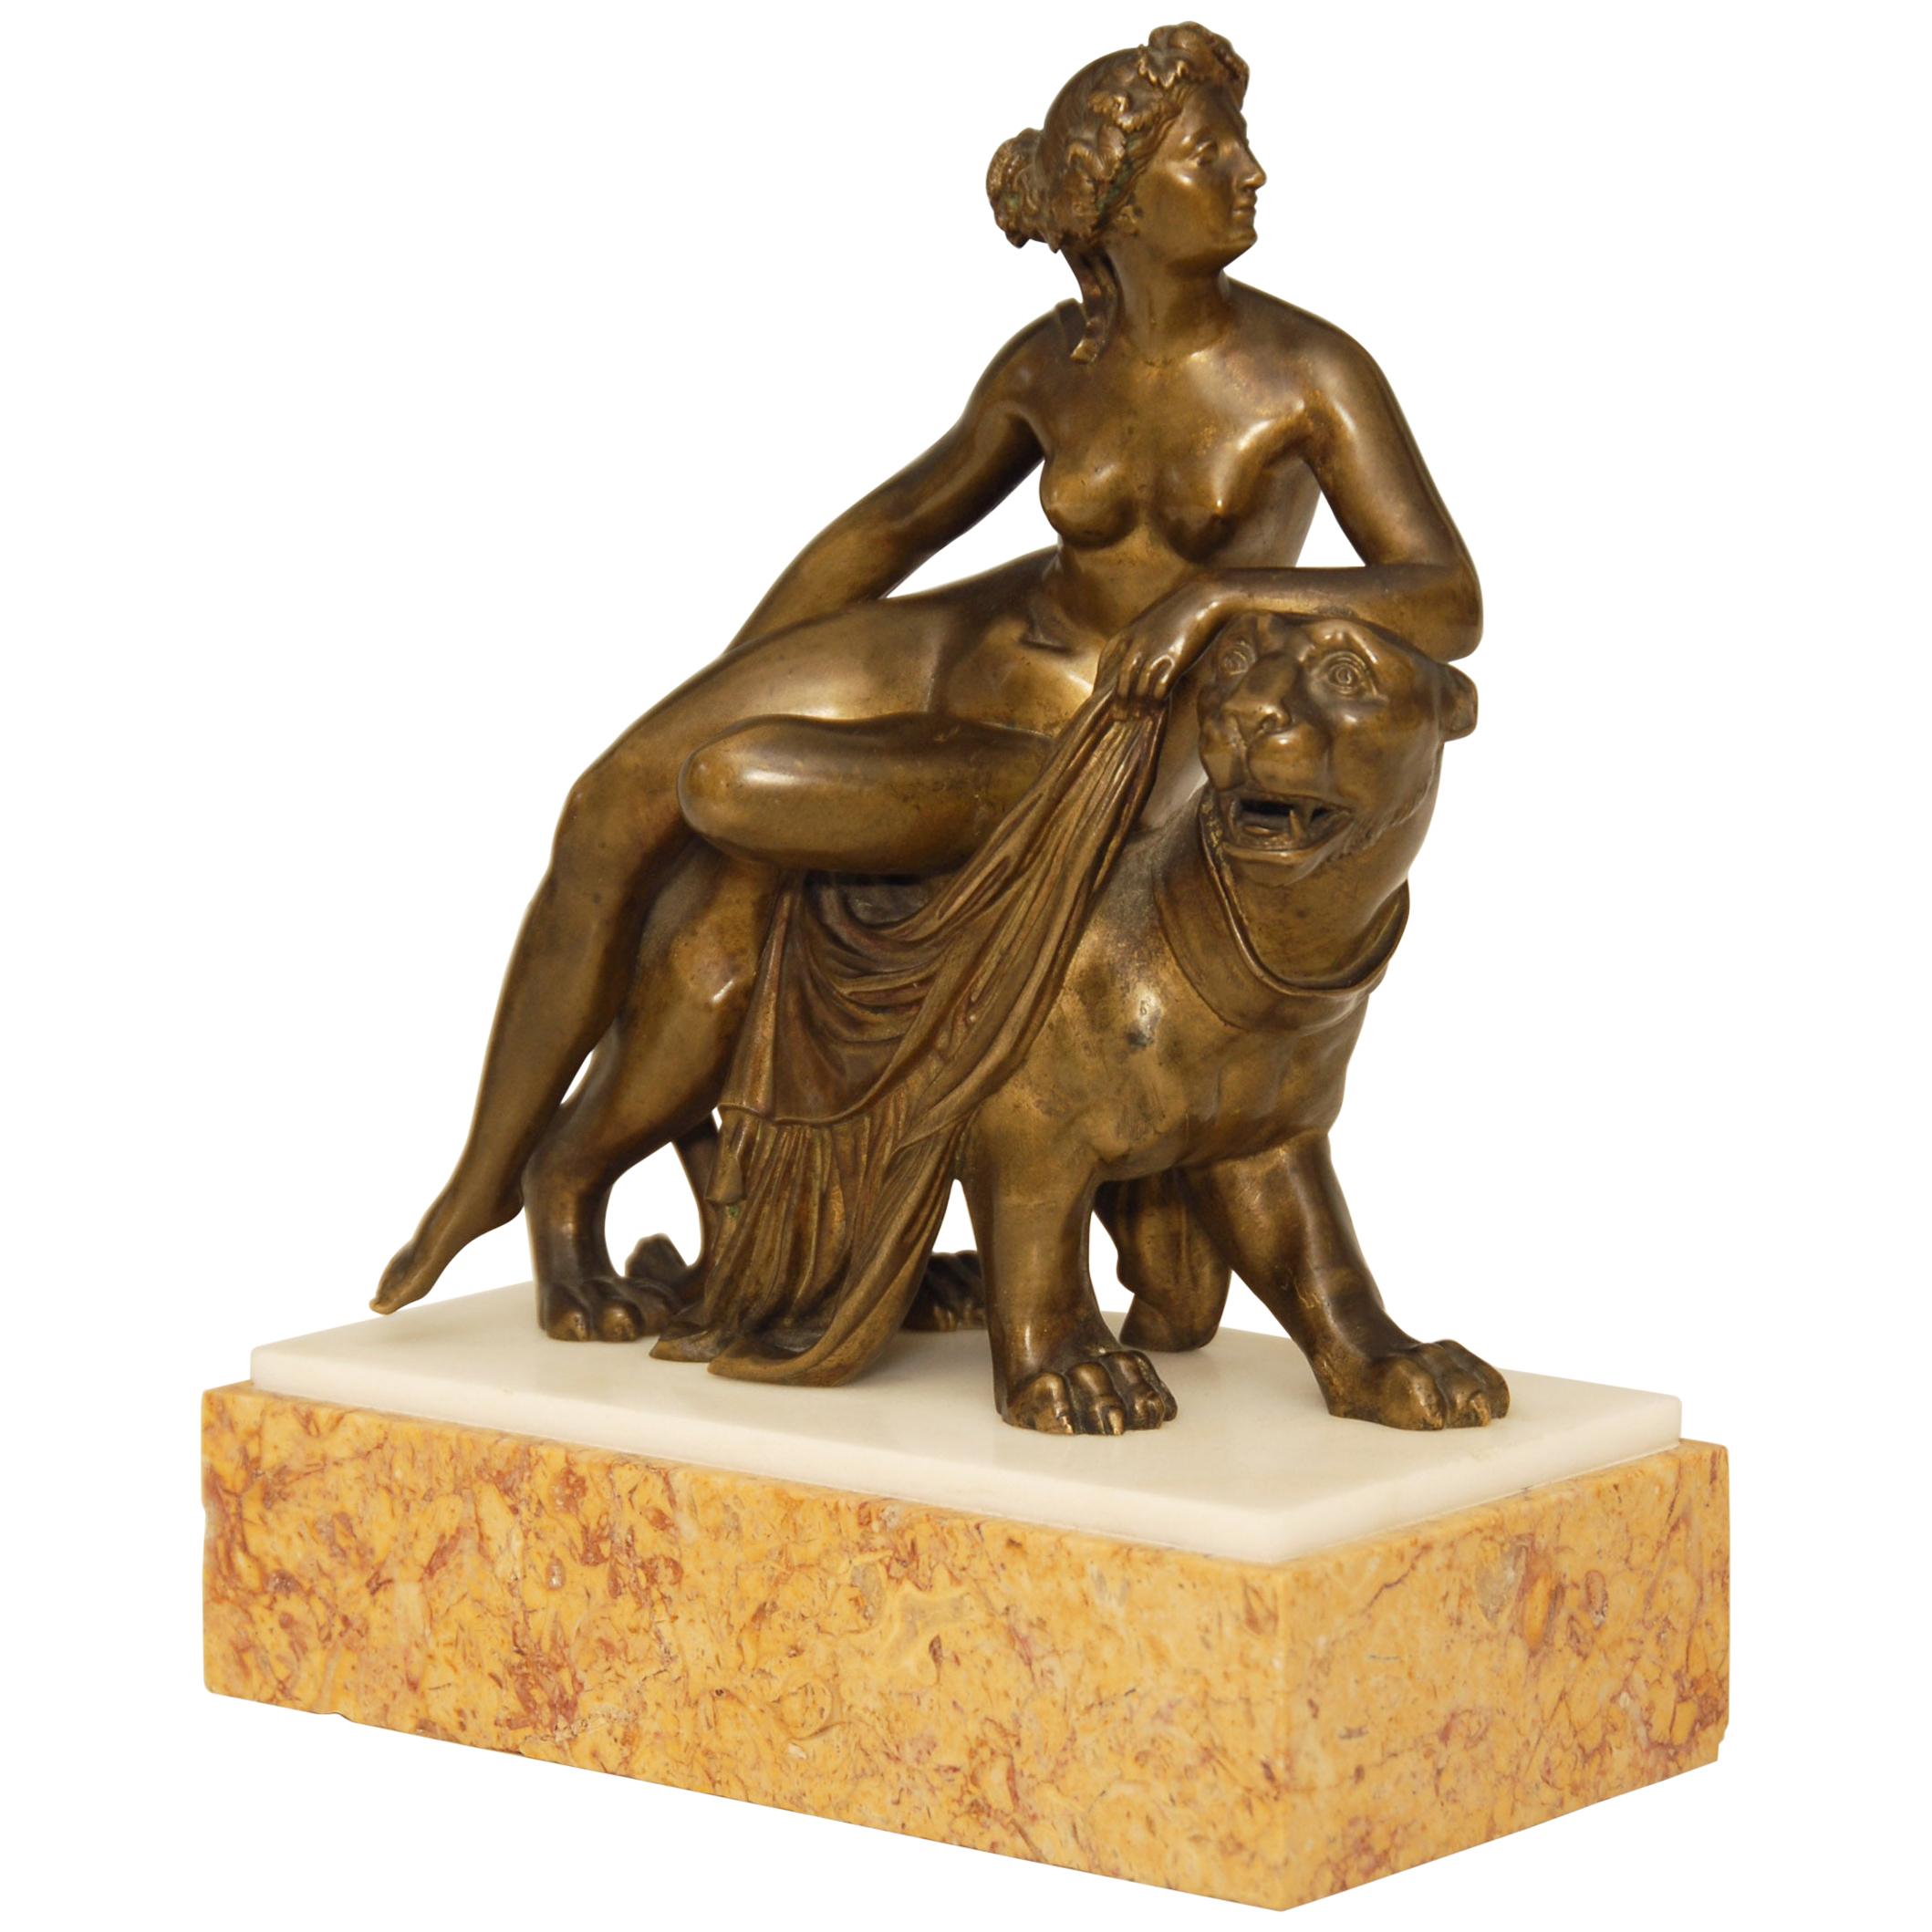 Regency Bronze Statue or Sculpture of a Nude Female Riding on a Lion For Sale